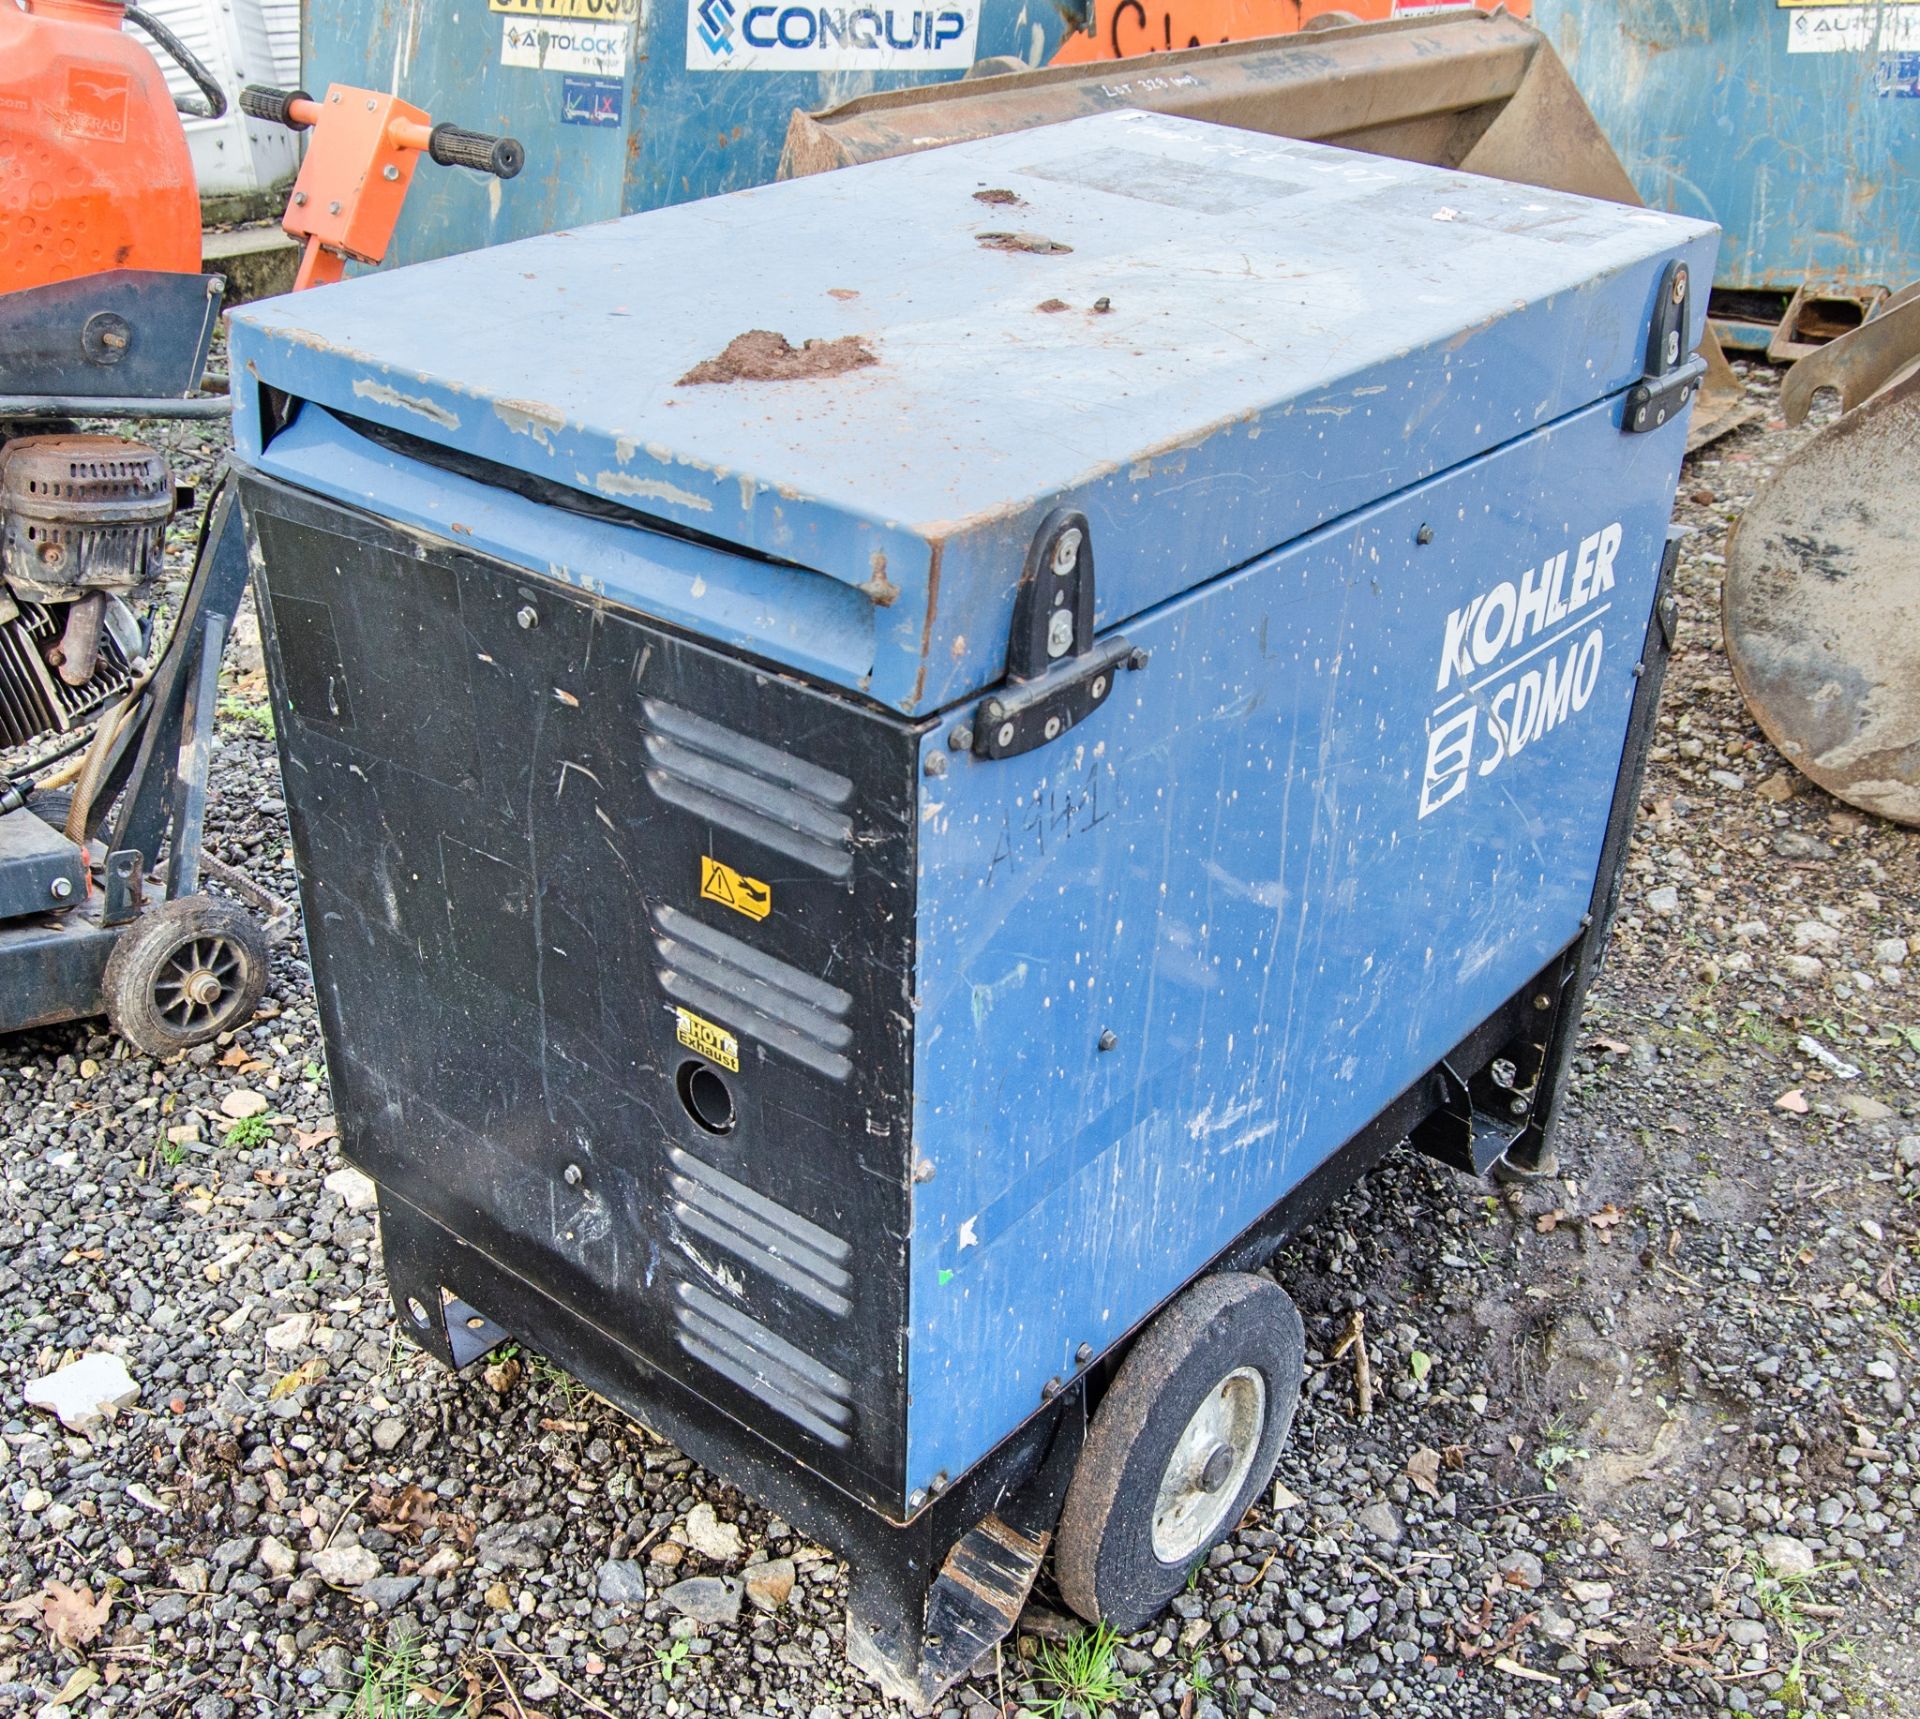 SDMO 6000E diesel driven 6 kva generator Recorded hours: 1705 A941696 - Image 2 of 5